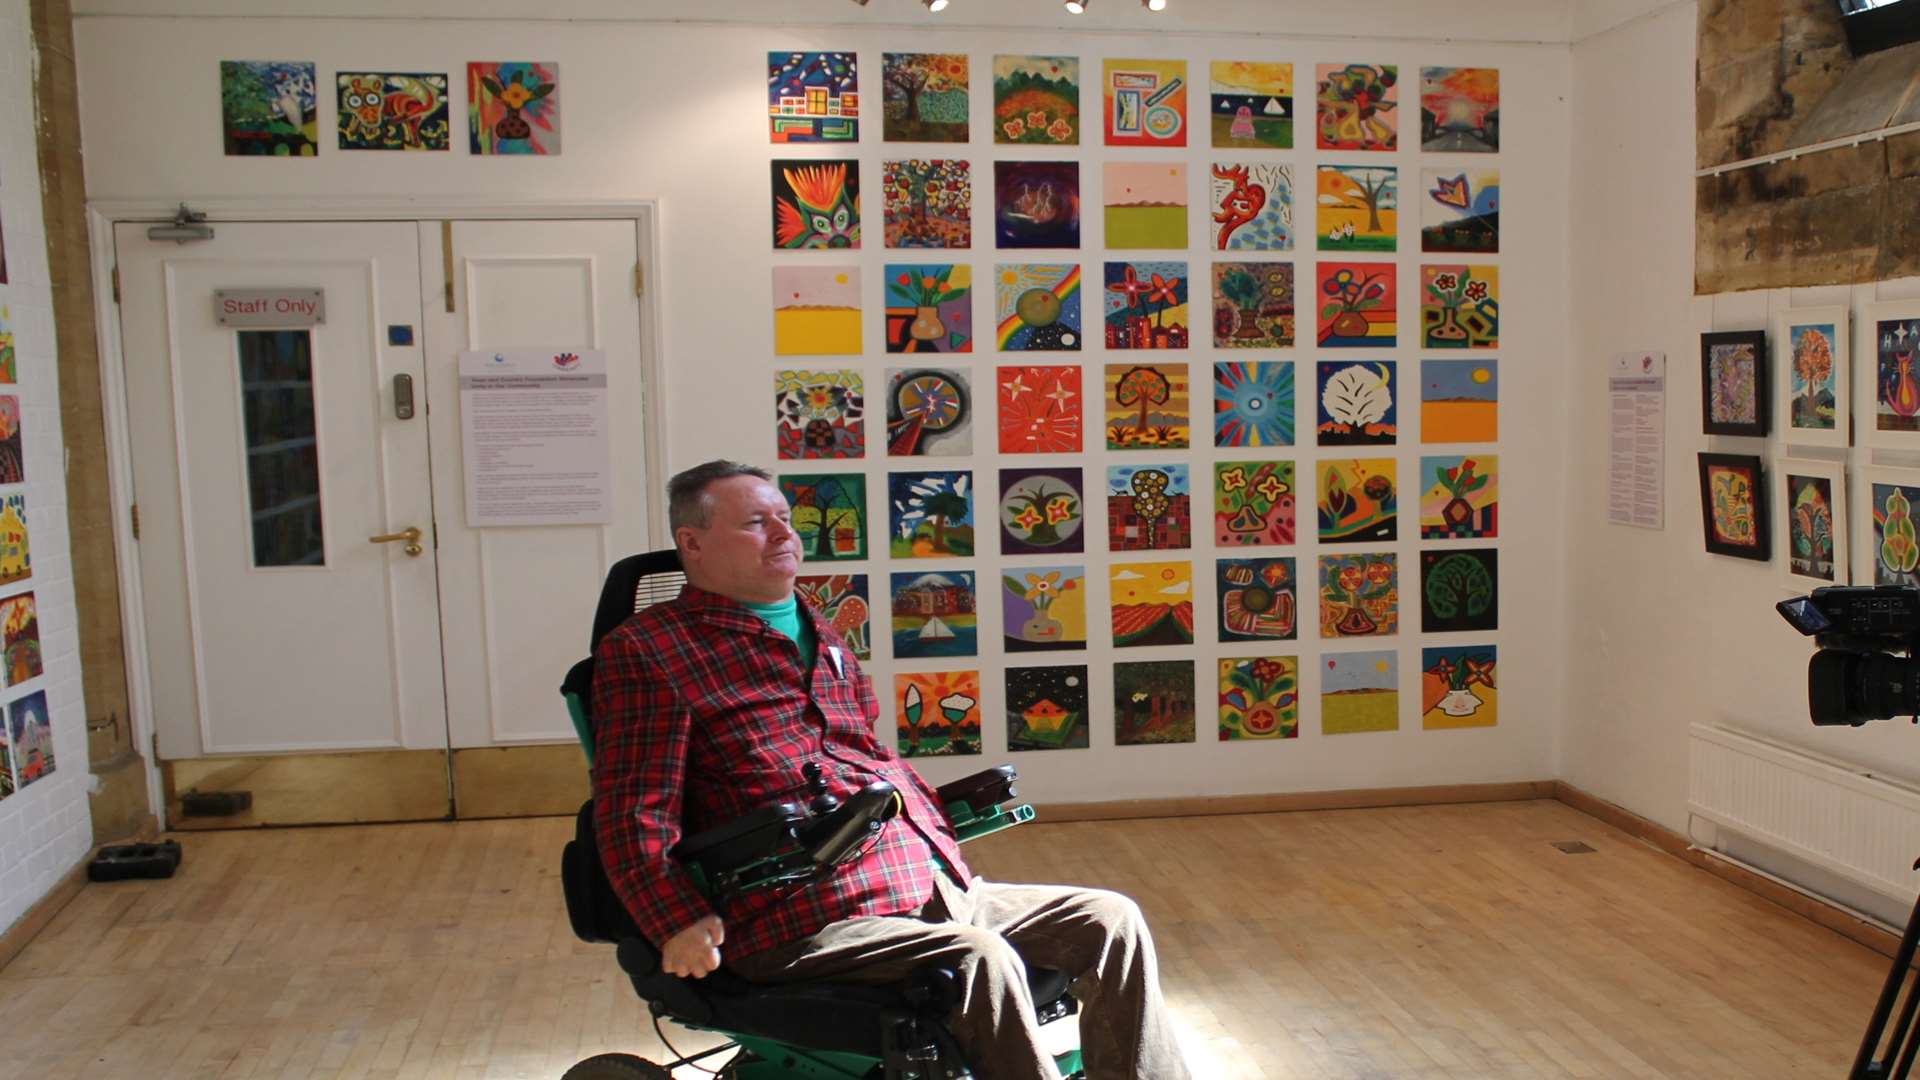 Roger Pedrick also unveiled an exhibition at the Trinity Theatre last year